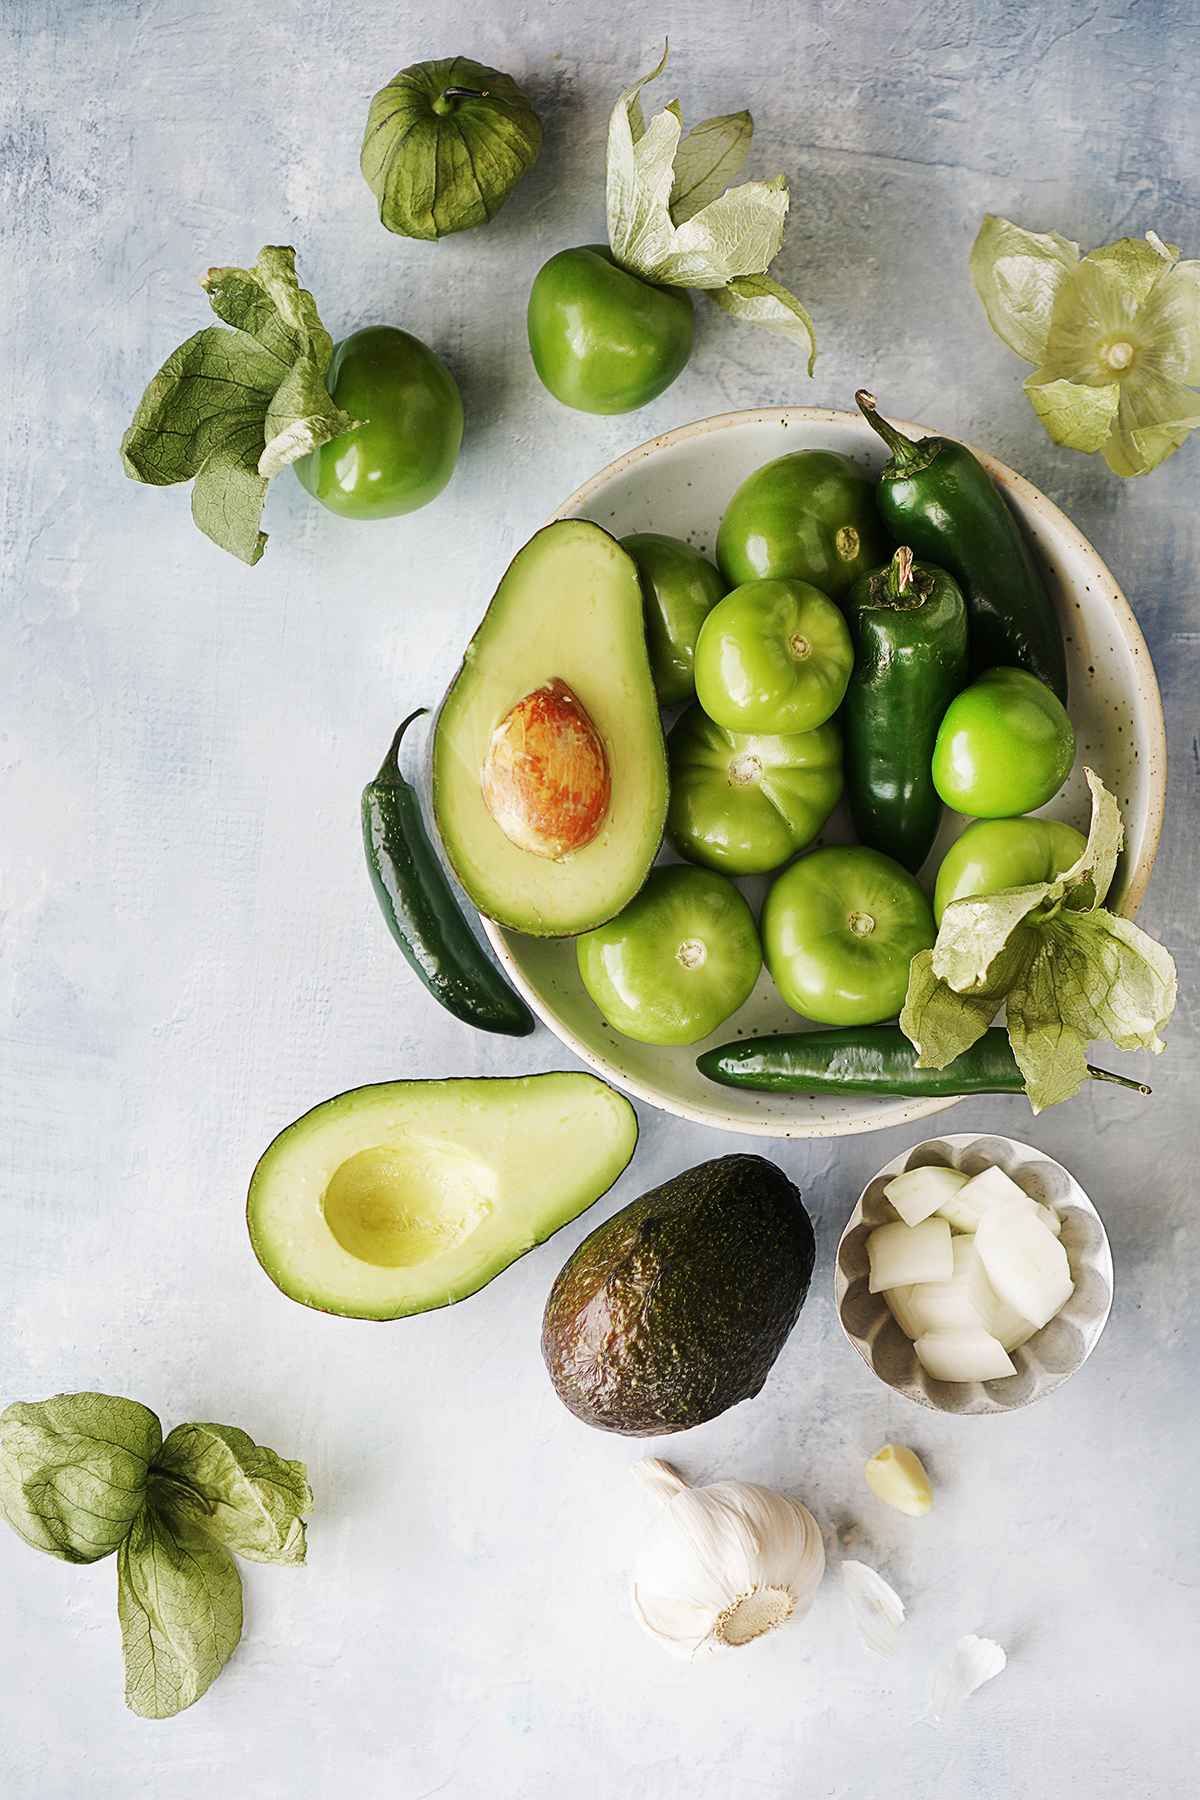 Ingredients: tomatillos, avocados, serrano and jalapeño peppers, onion & a garlic clove